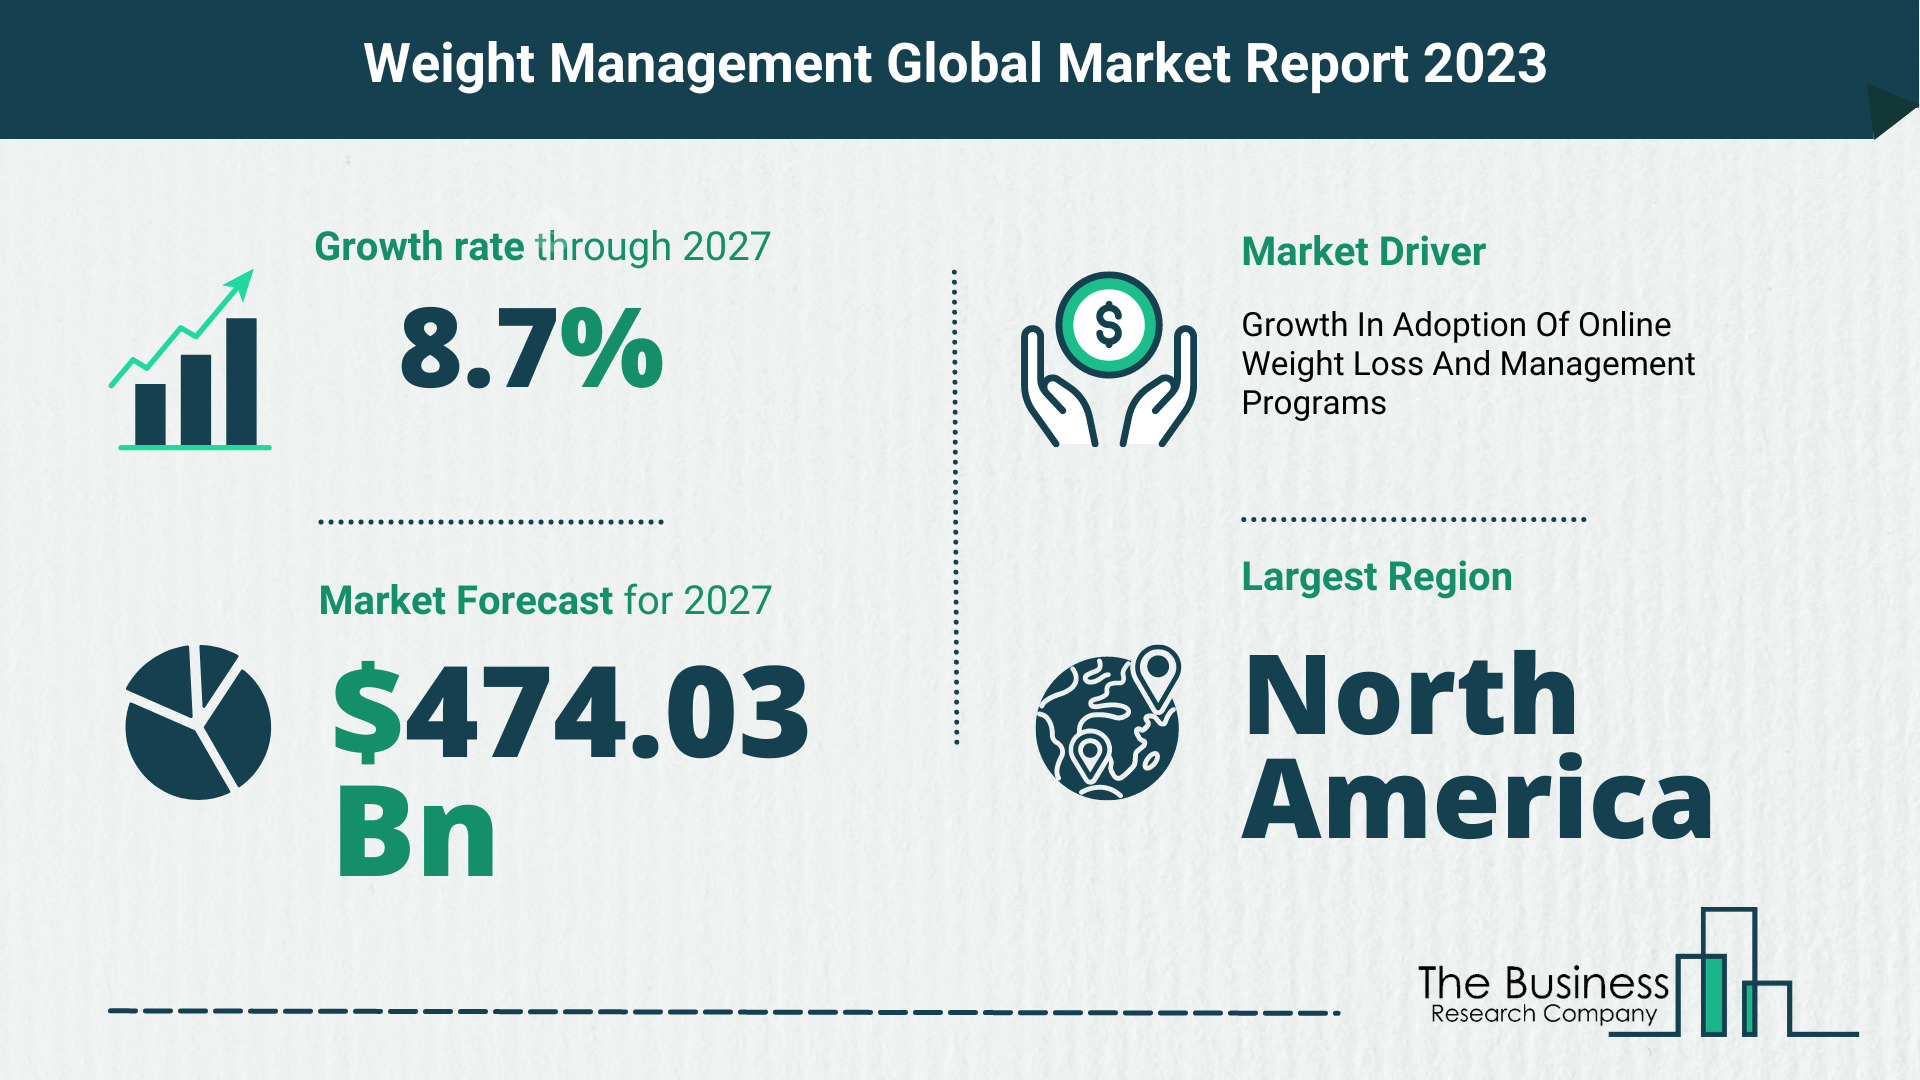 Weight Management Market Size, Share, And Growth Rate Analysis 2023